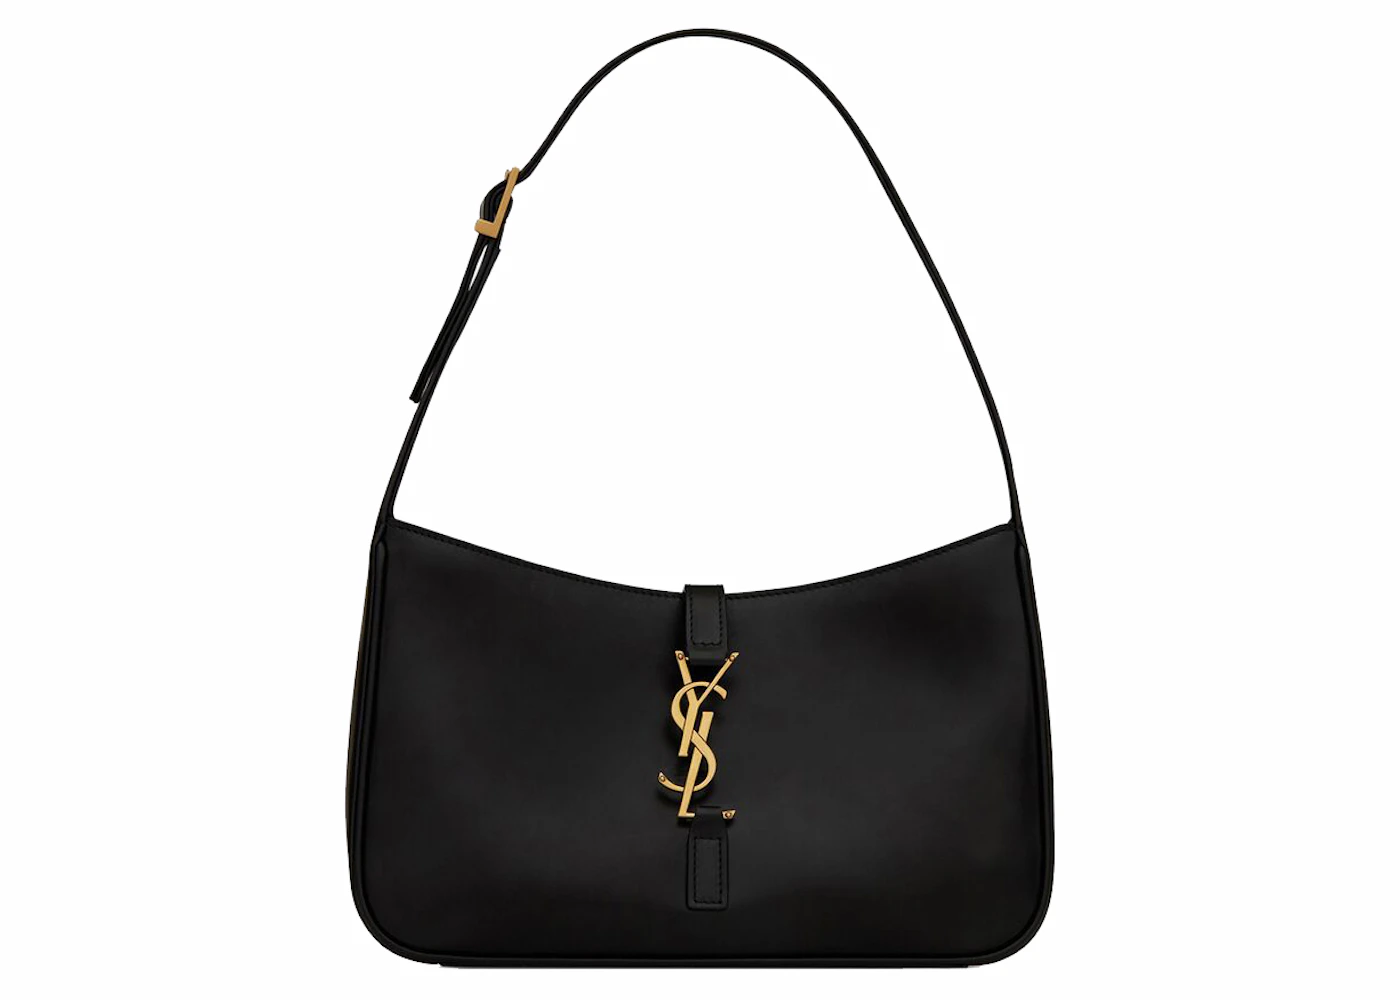 Review] YSL Hobo Le 5 a 7 Bag in black calfskin from DHgate :  r/RepladiesDesigner